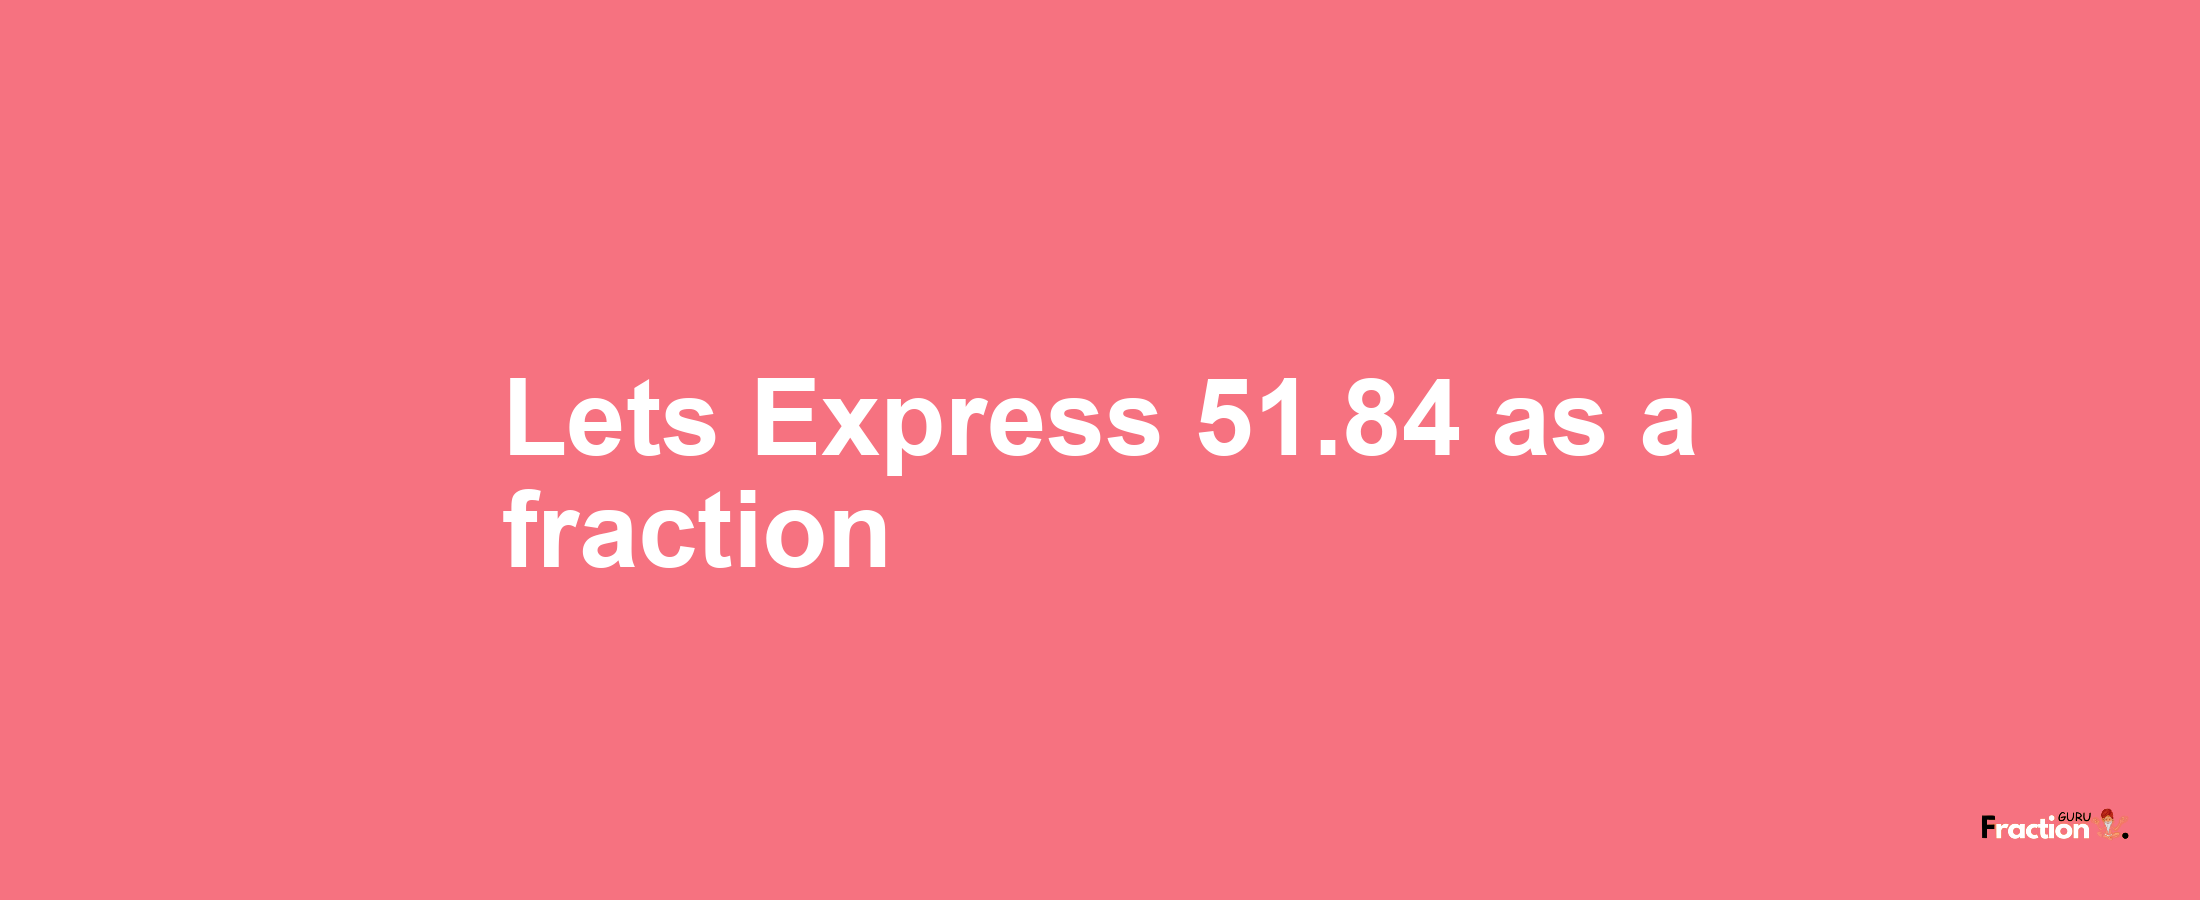 Lets Express 51.84 as afraction